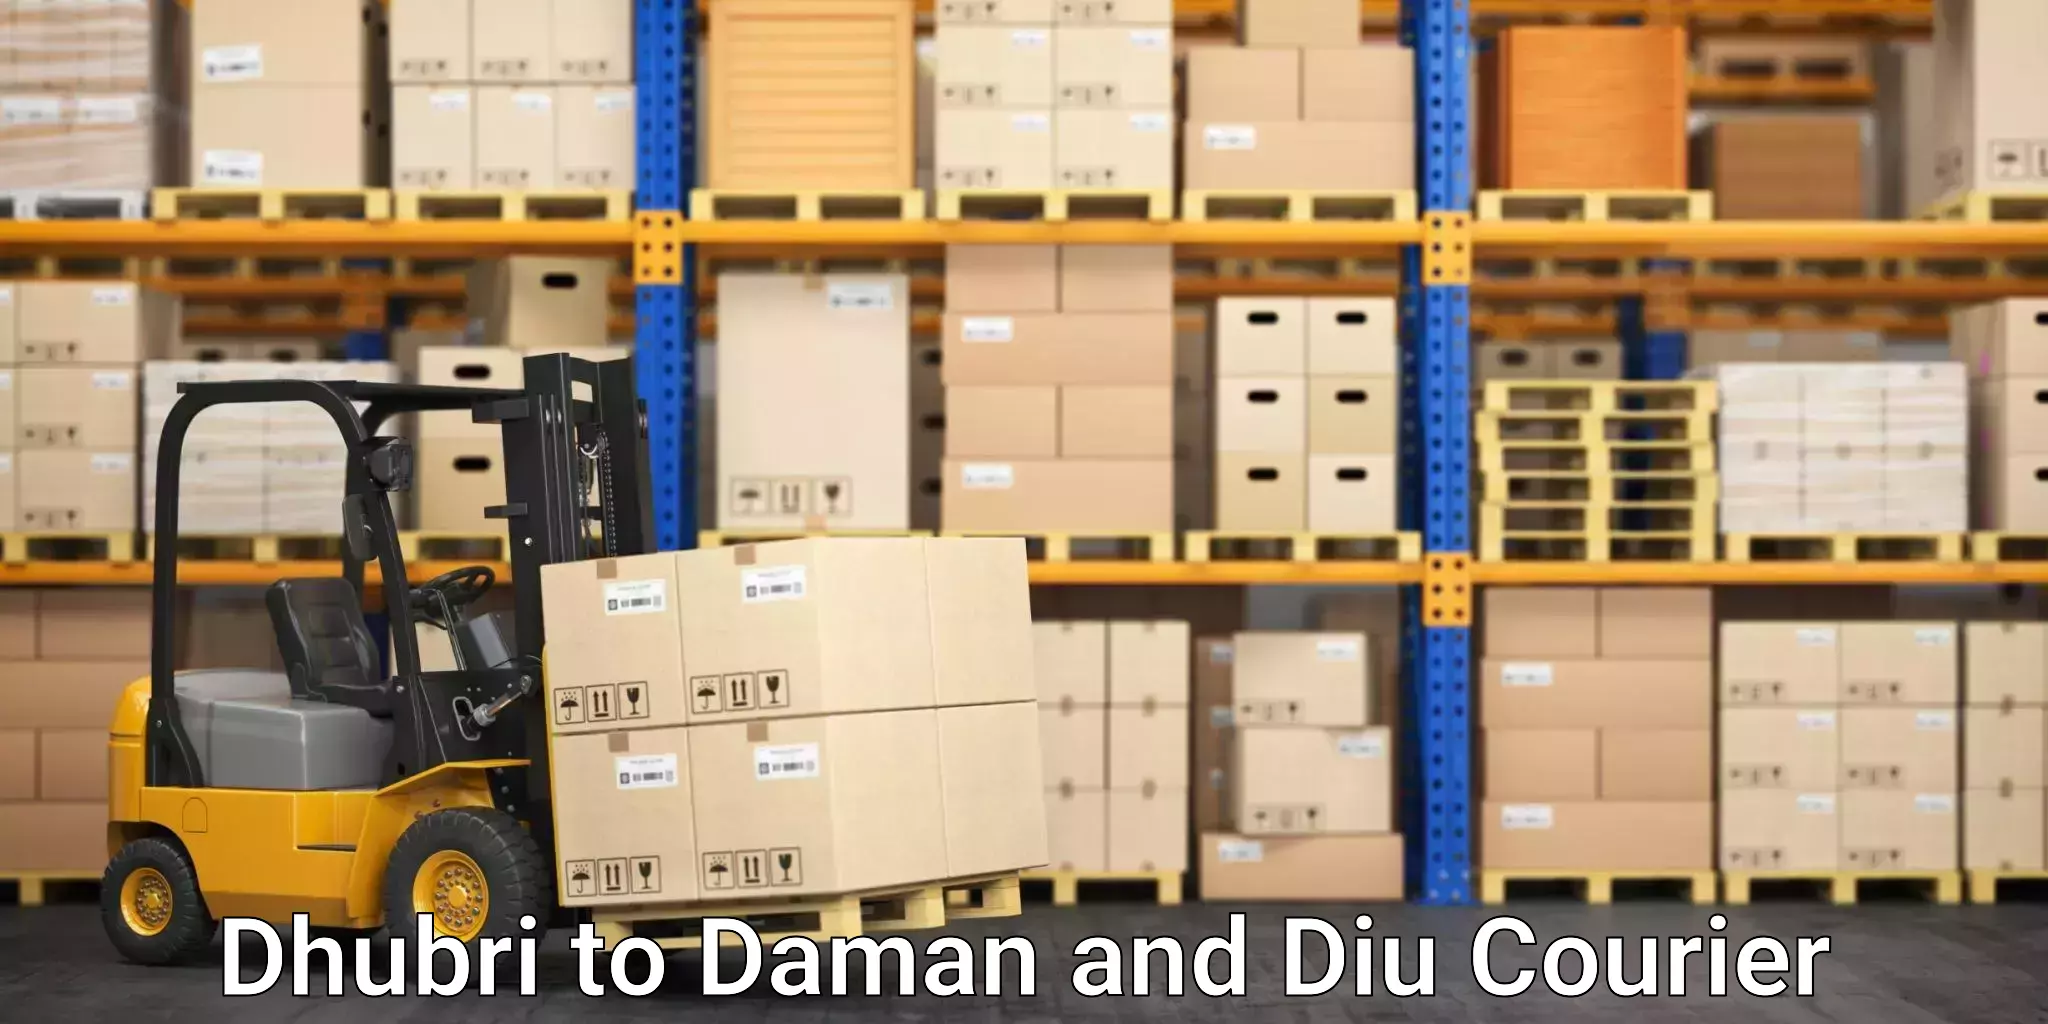 Full-service courier options Dhubri to Daman and Diu